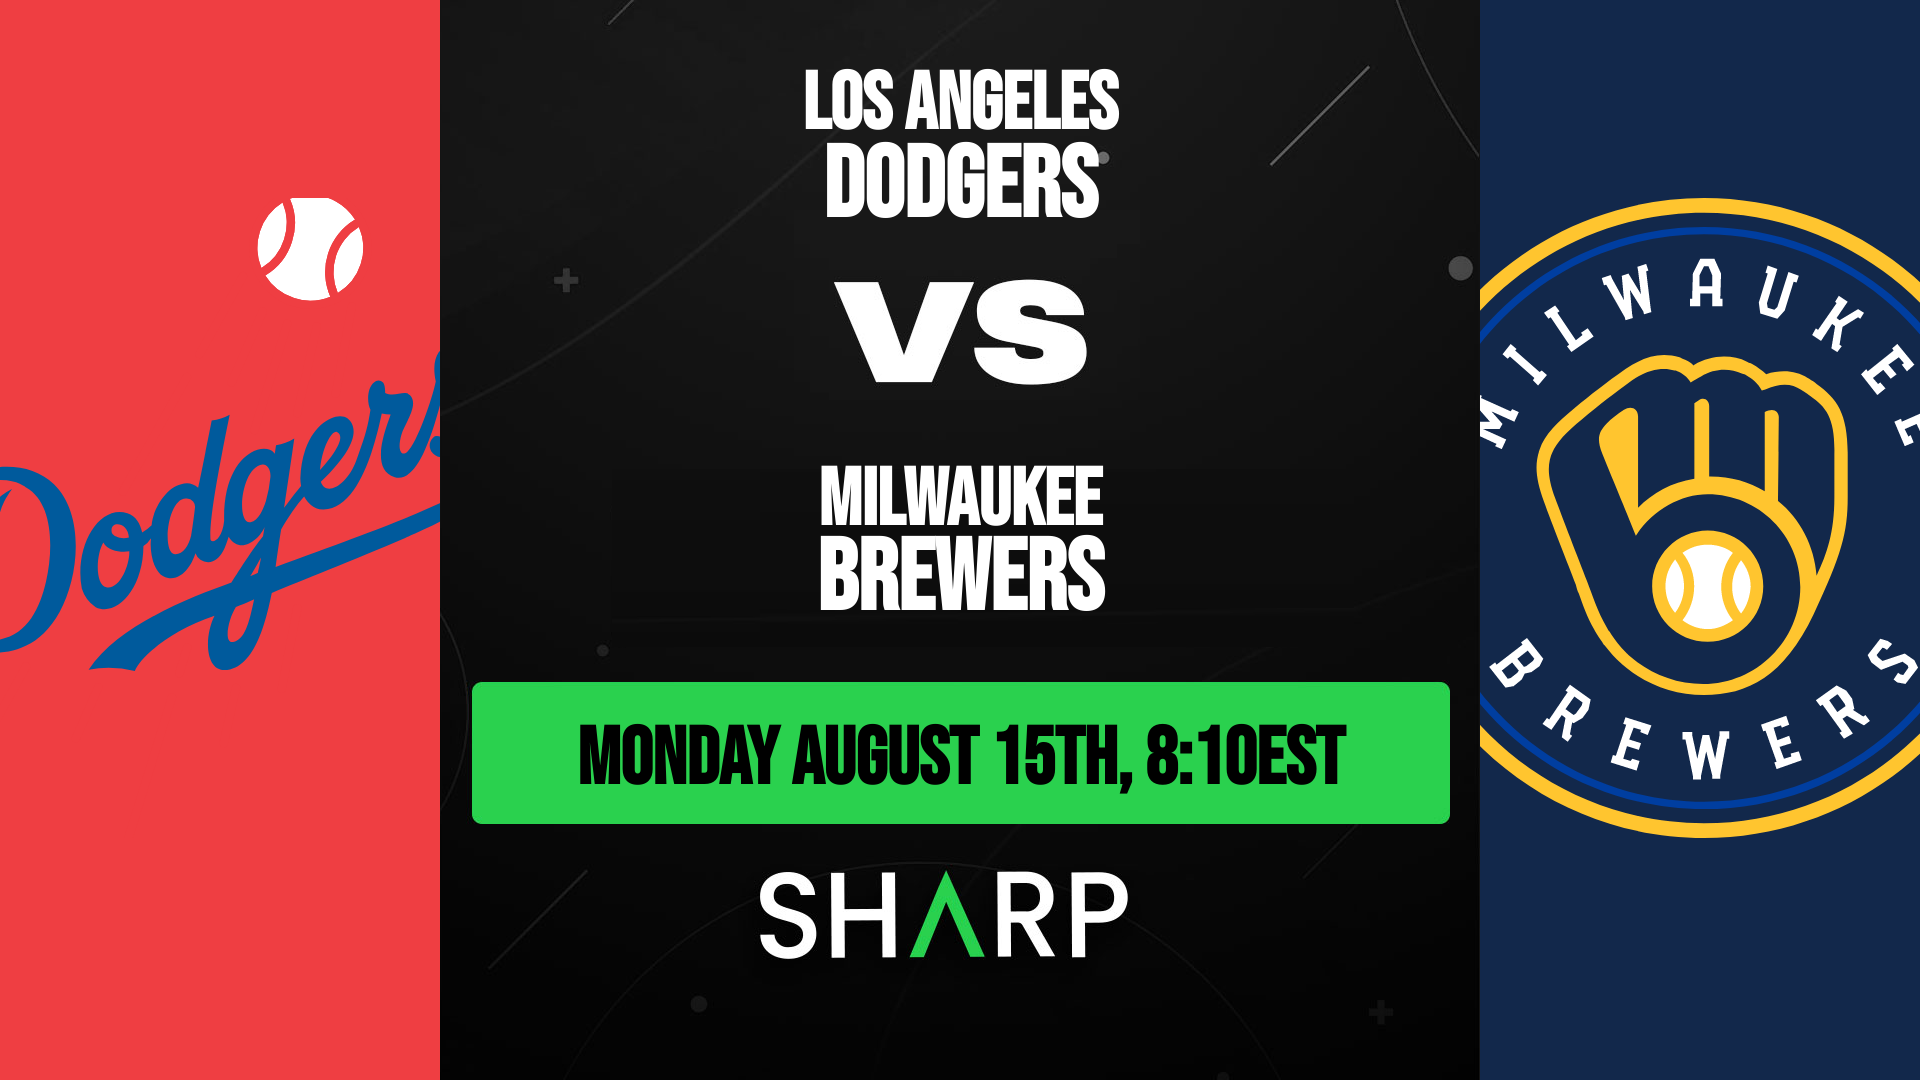 Los Angeles Dodgers @ Milwaukee Brewers Matchup Preview - August 15th, 2022